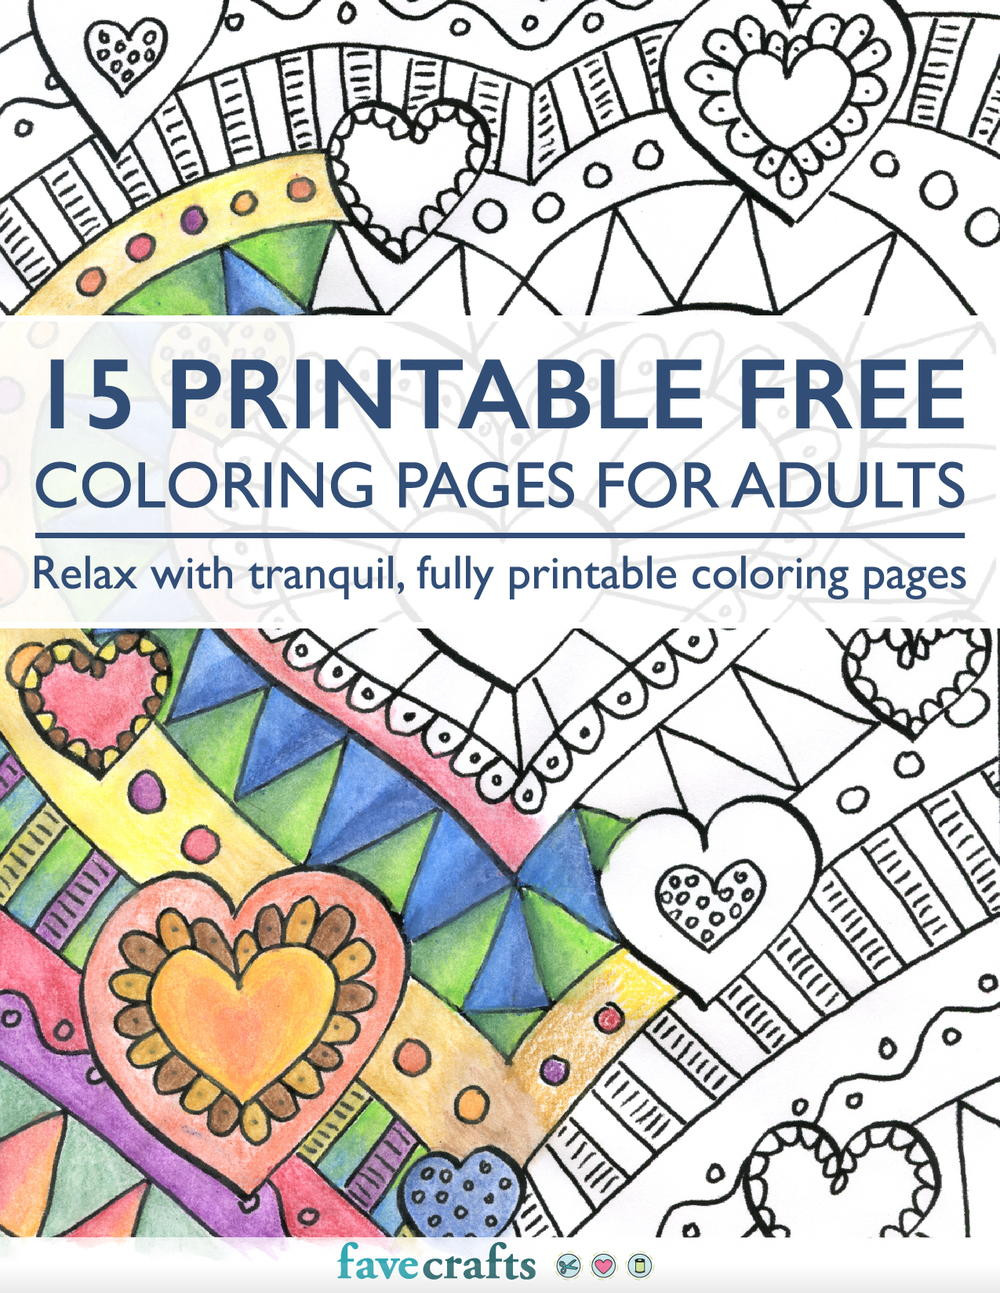 Free Coloring Pages For Adults Printable
 15 Printable Free Coloring Pages for Adults [PDF